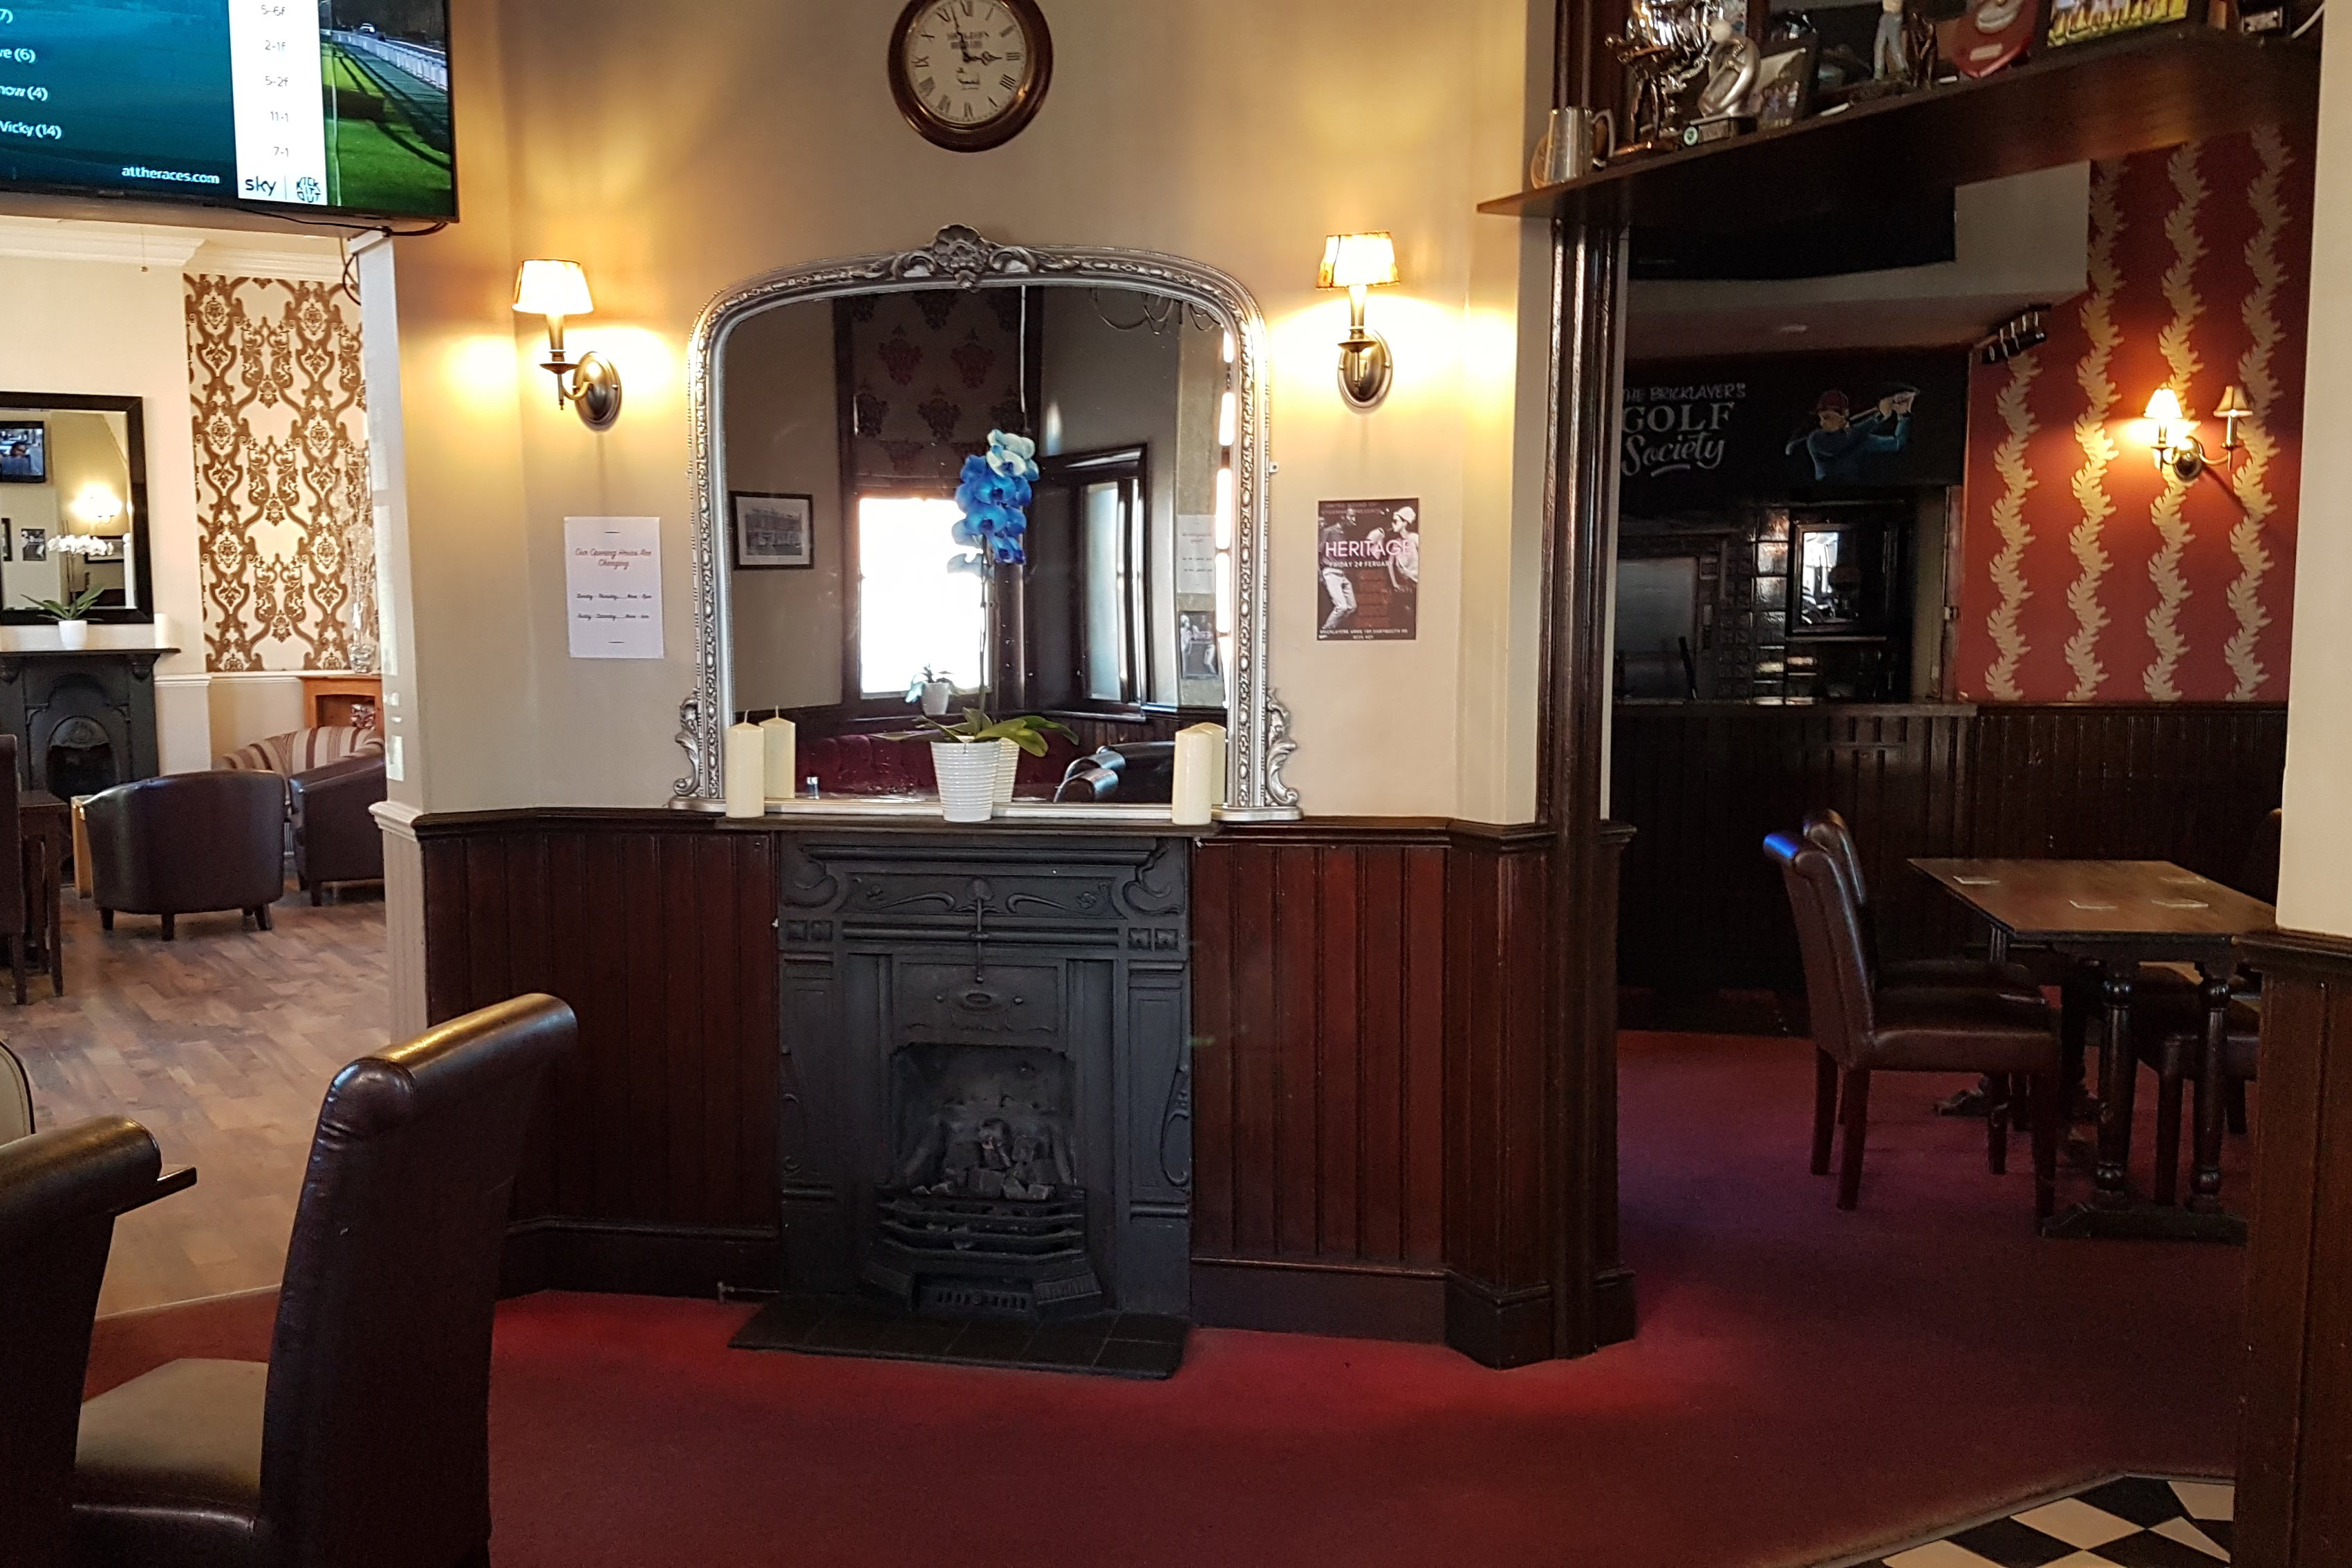 pic of pub fireplace